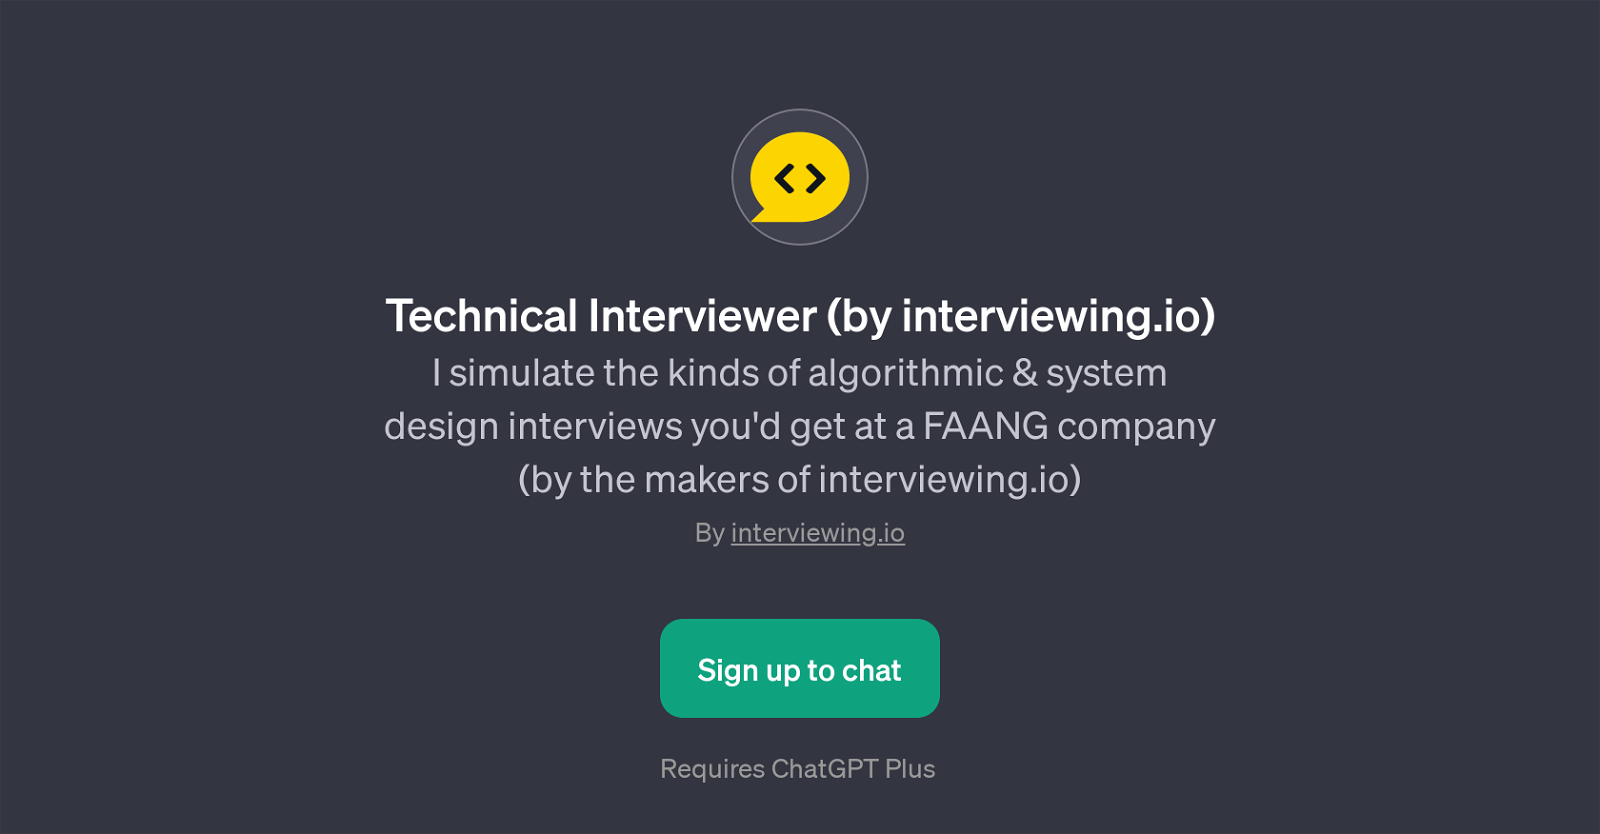 Technical Interviewer (by interviewing.io) website